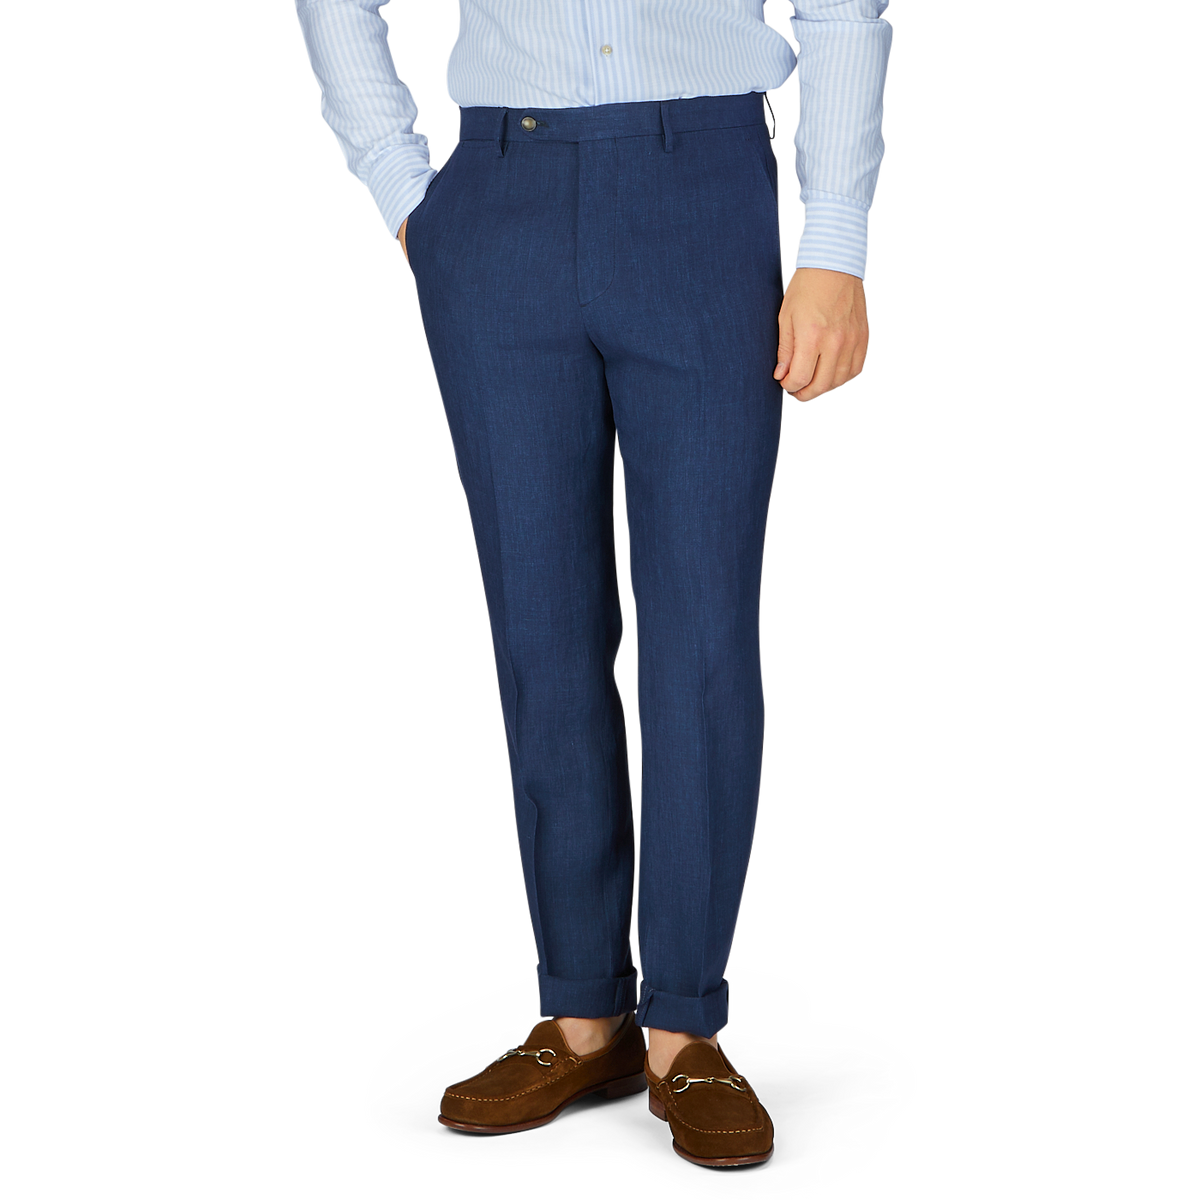 Person wearing Berwich navy blue melange linen flat front trousers and brown loafers with no visible upper body.